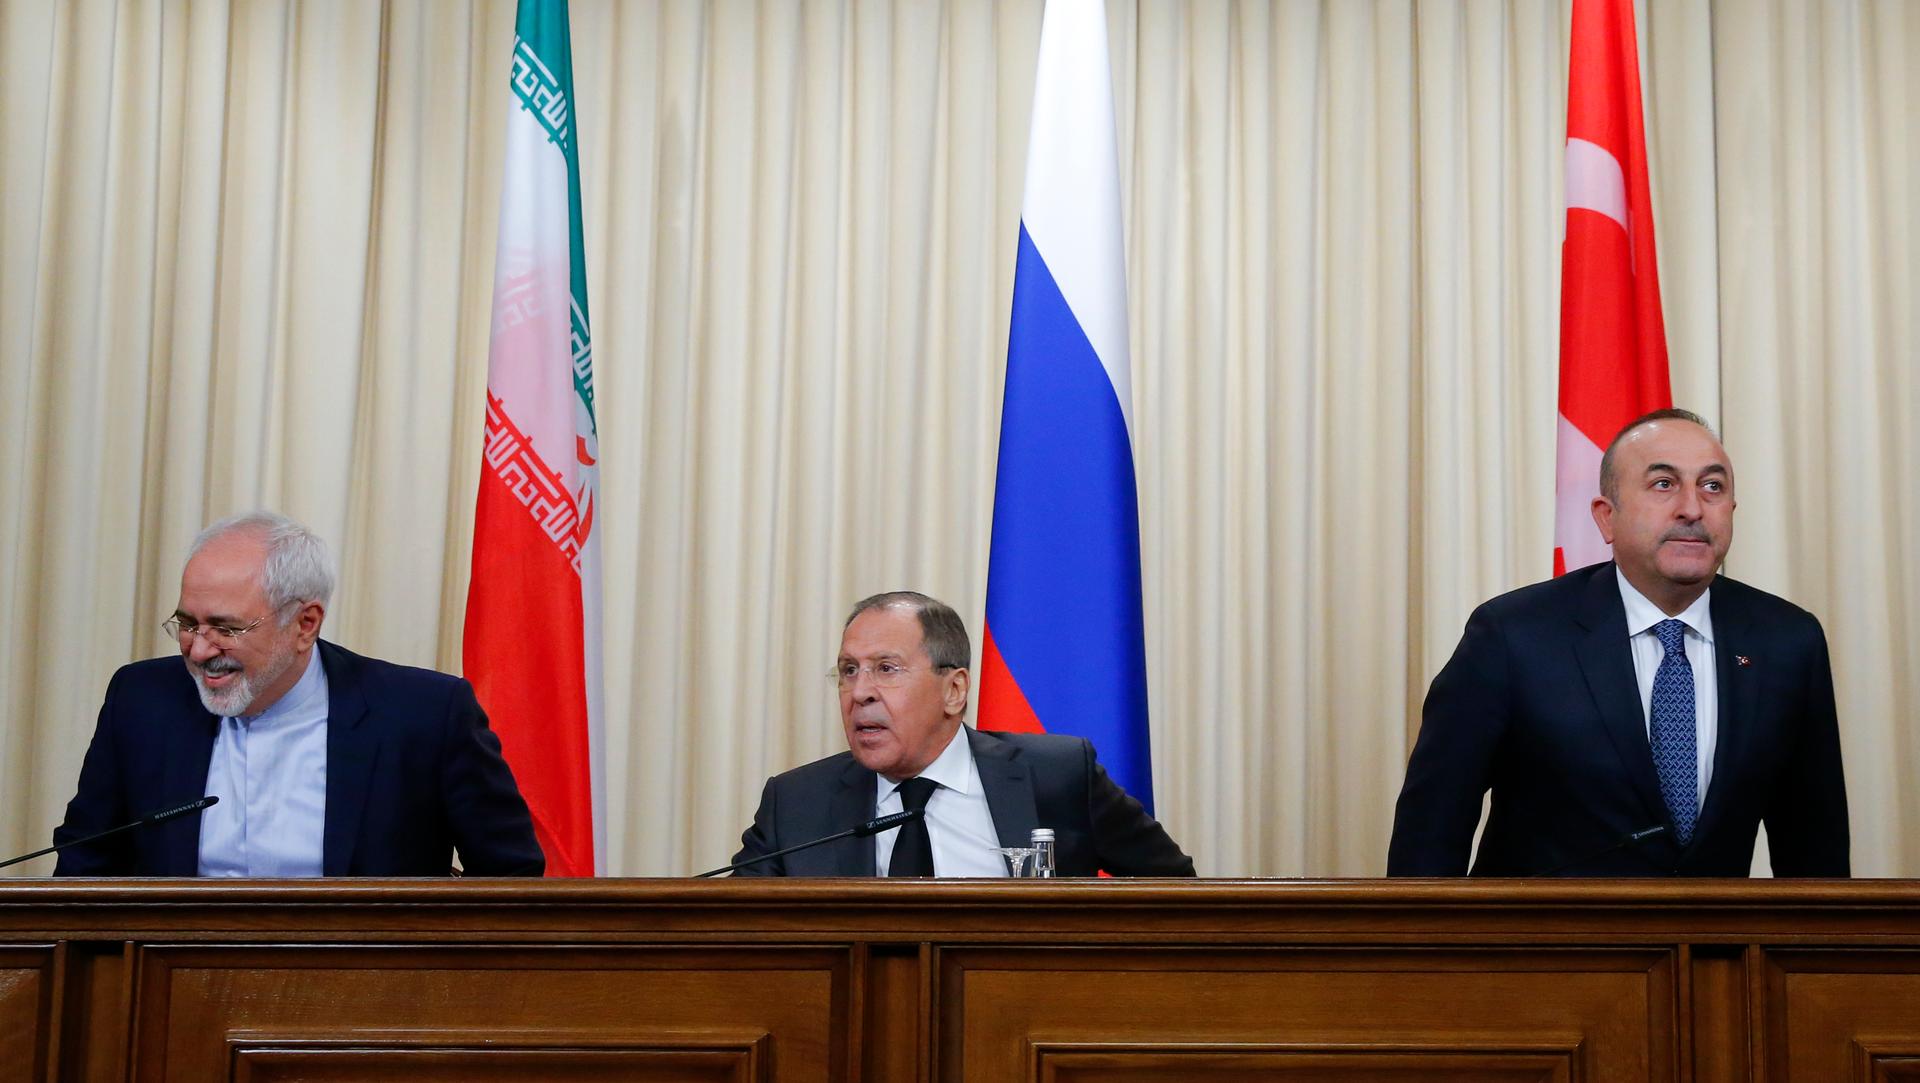 Foreign ministers, Sergei Lavrov (C) of Russia, Mevlut Cavusoglu (R) of Turkey and Mohammad Javad Zarif of Iran, prepare for a news conference in Moscow, December 20th 2016. 